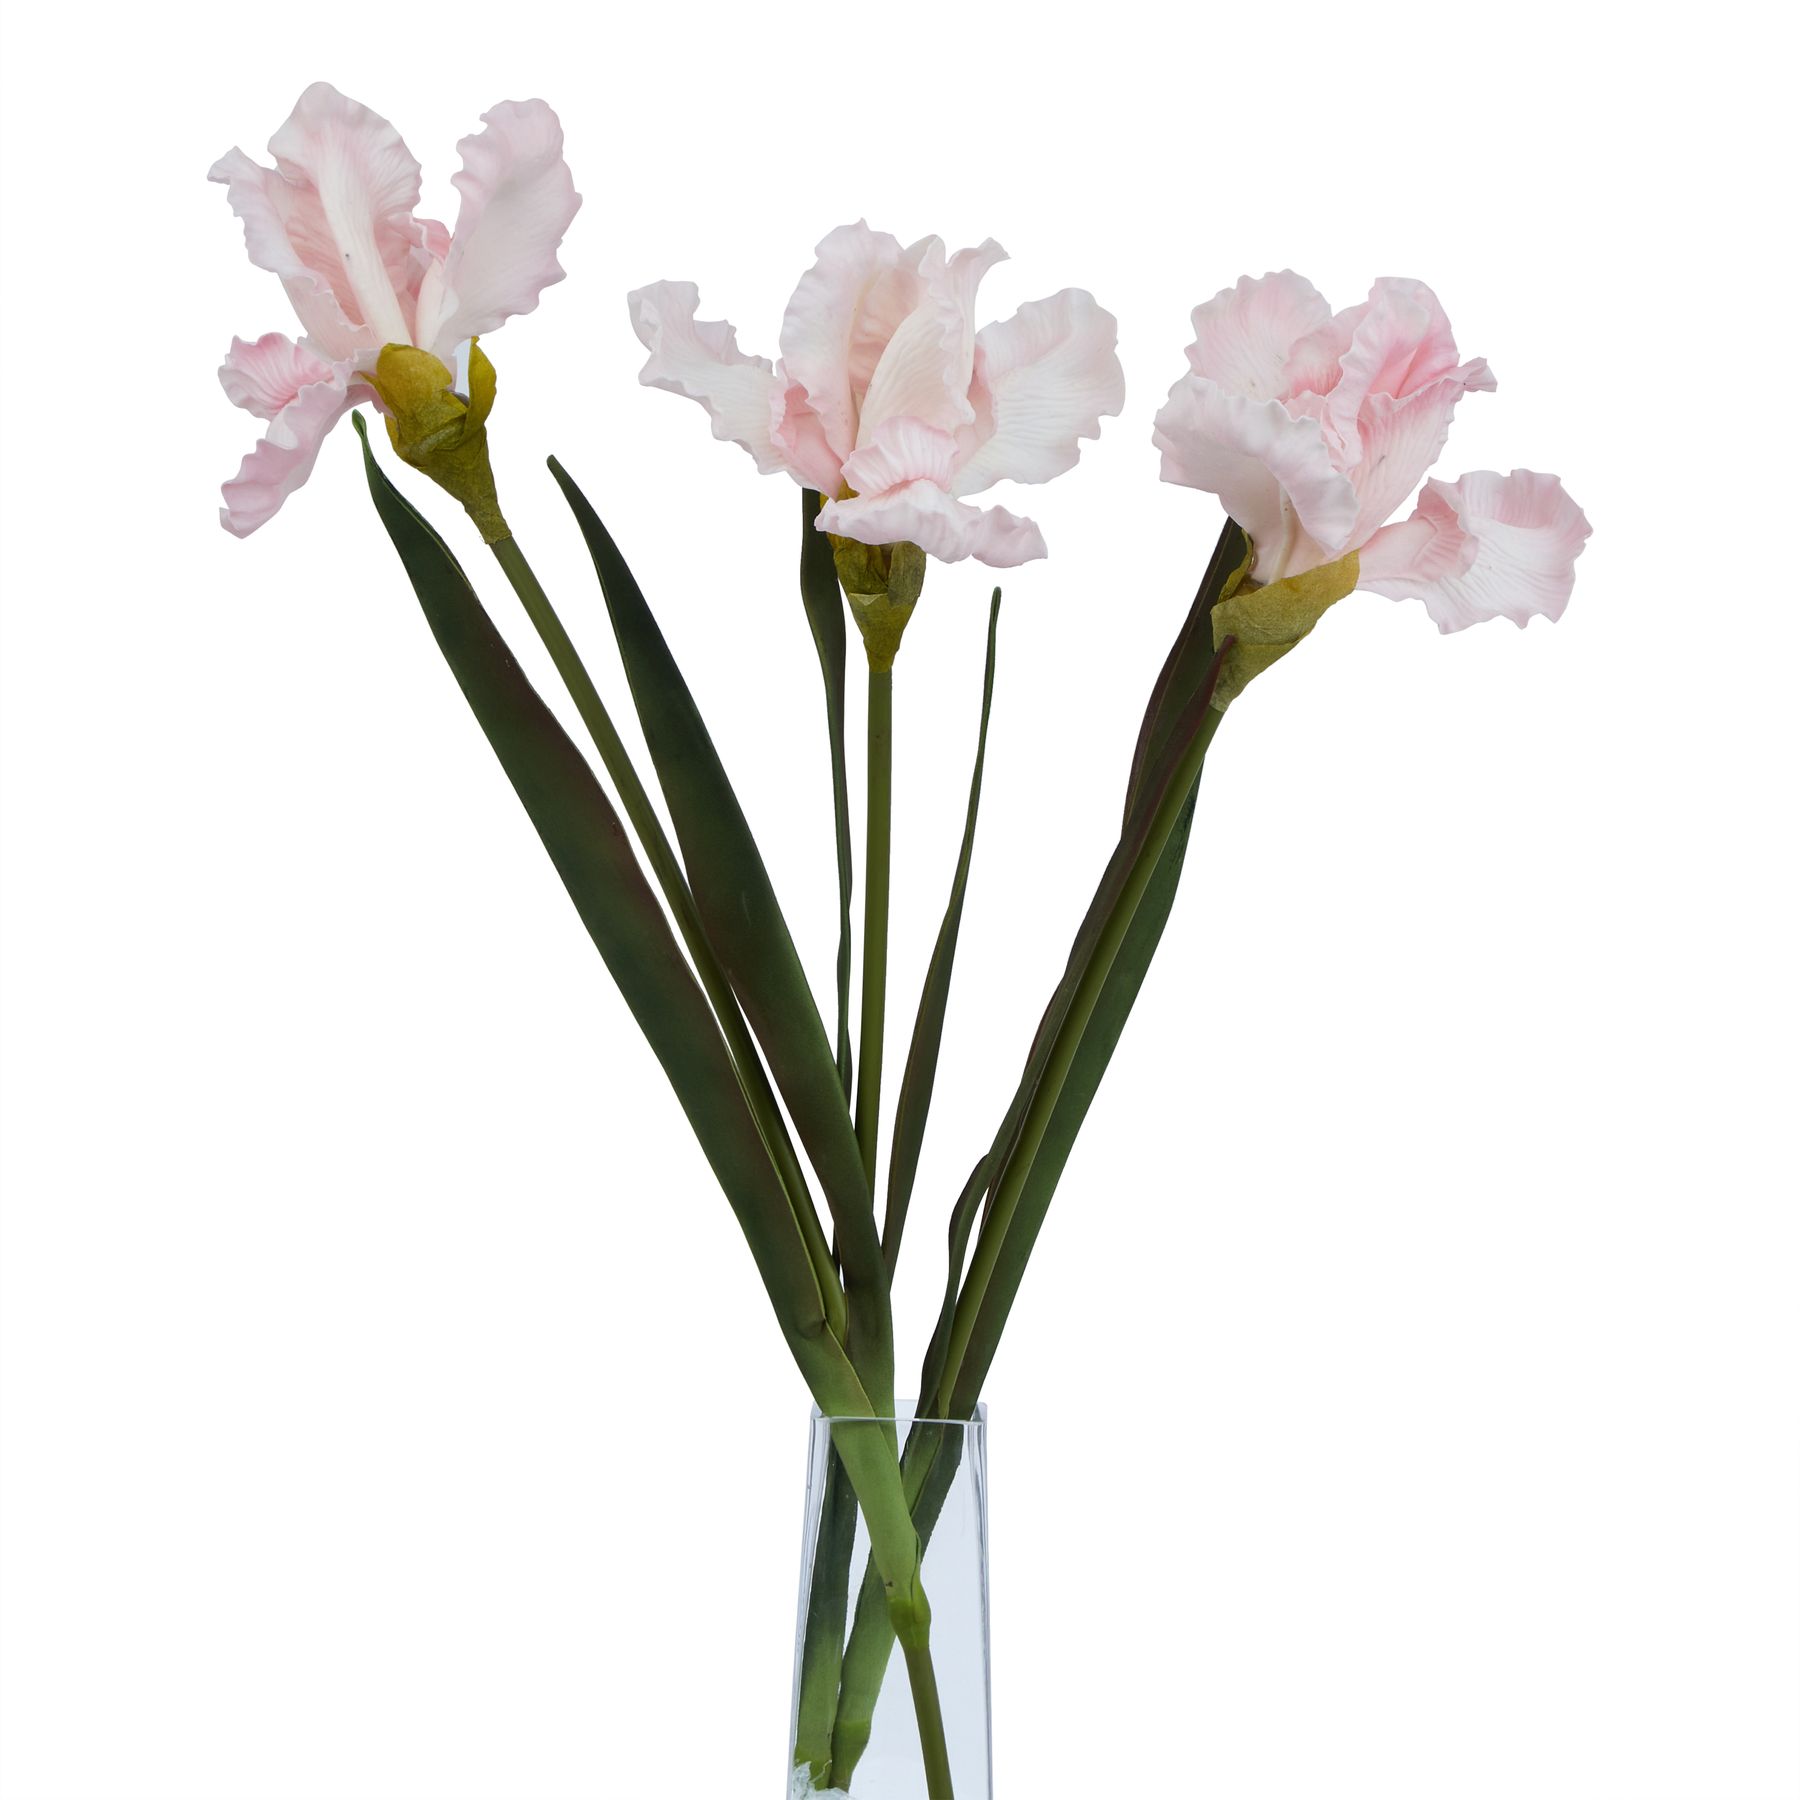 The Natural Garden Collection Pale Pink Fringed Iris - Image 3